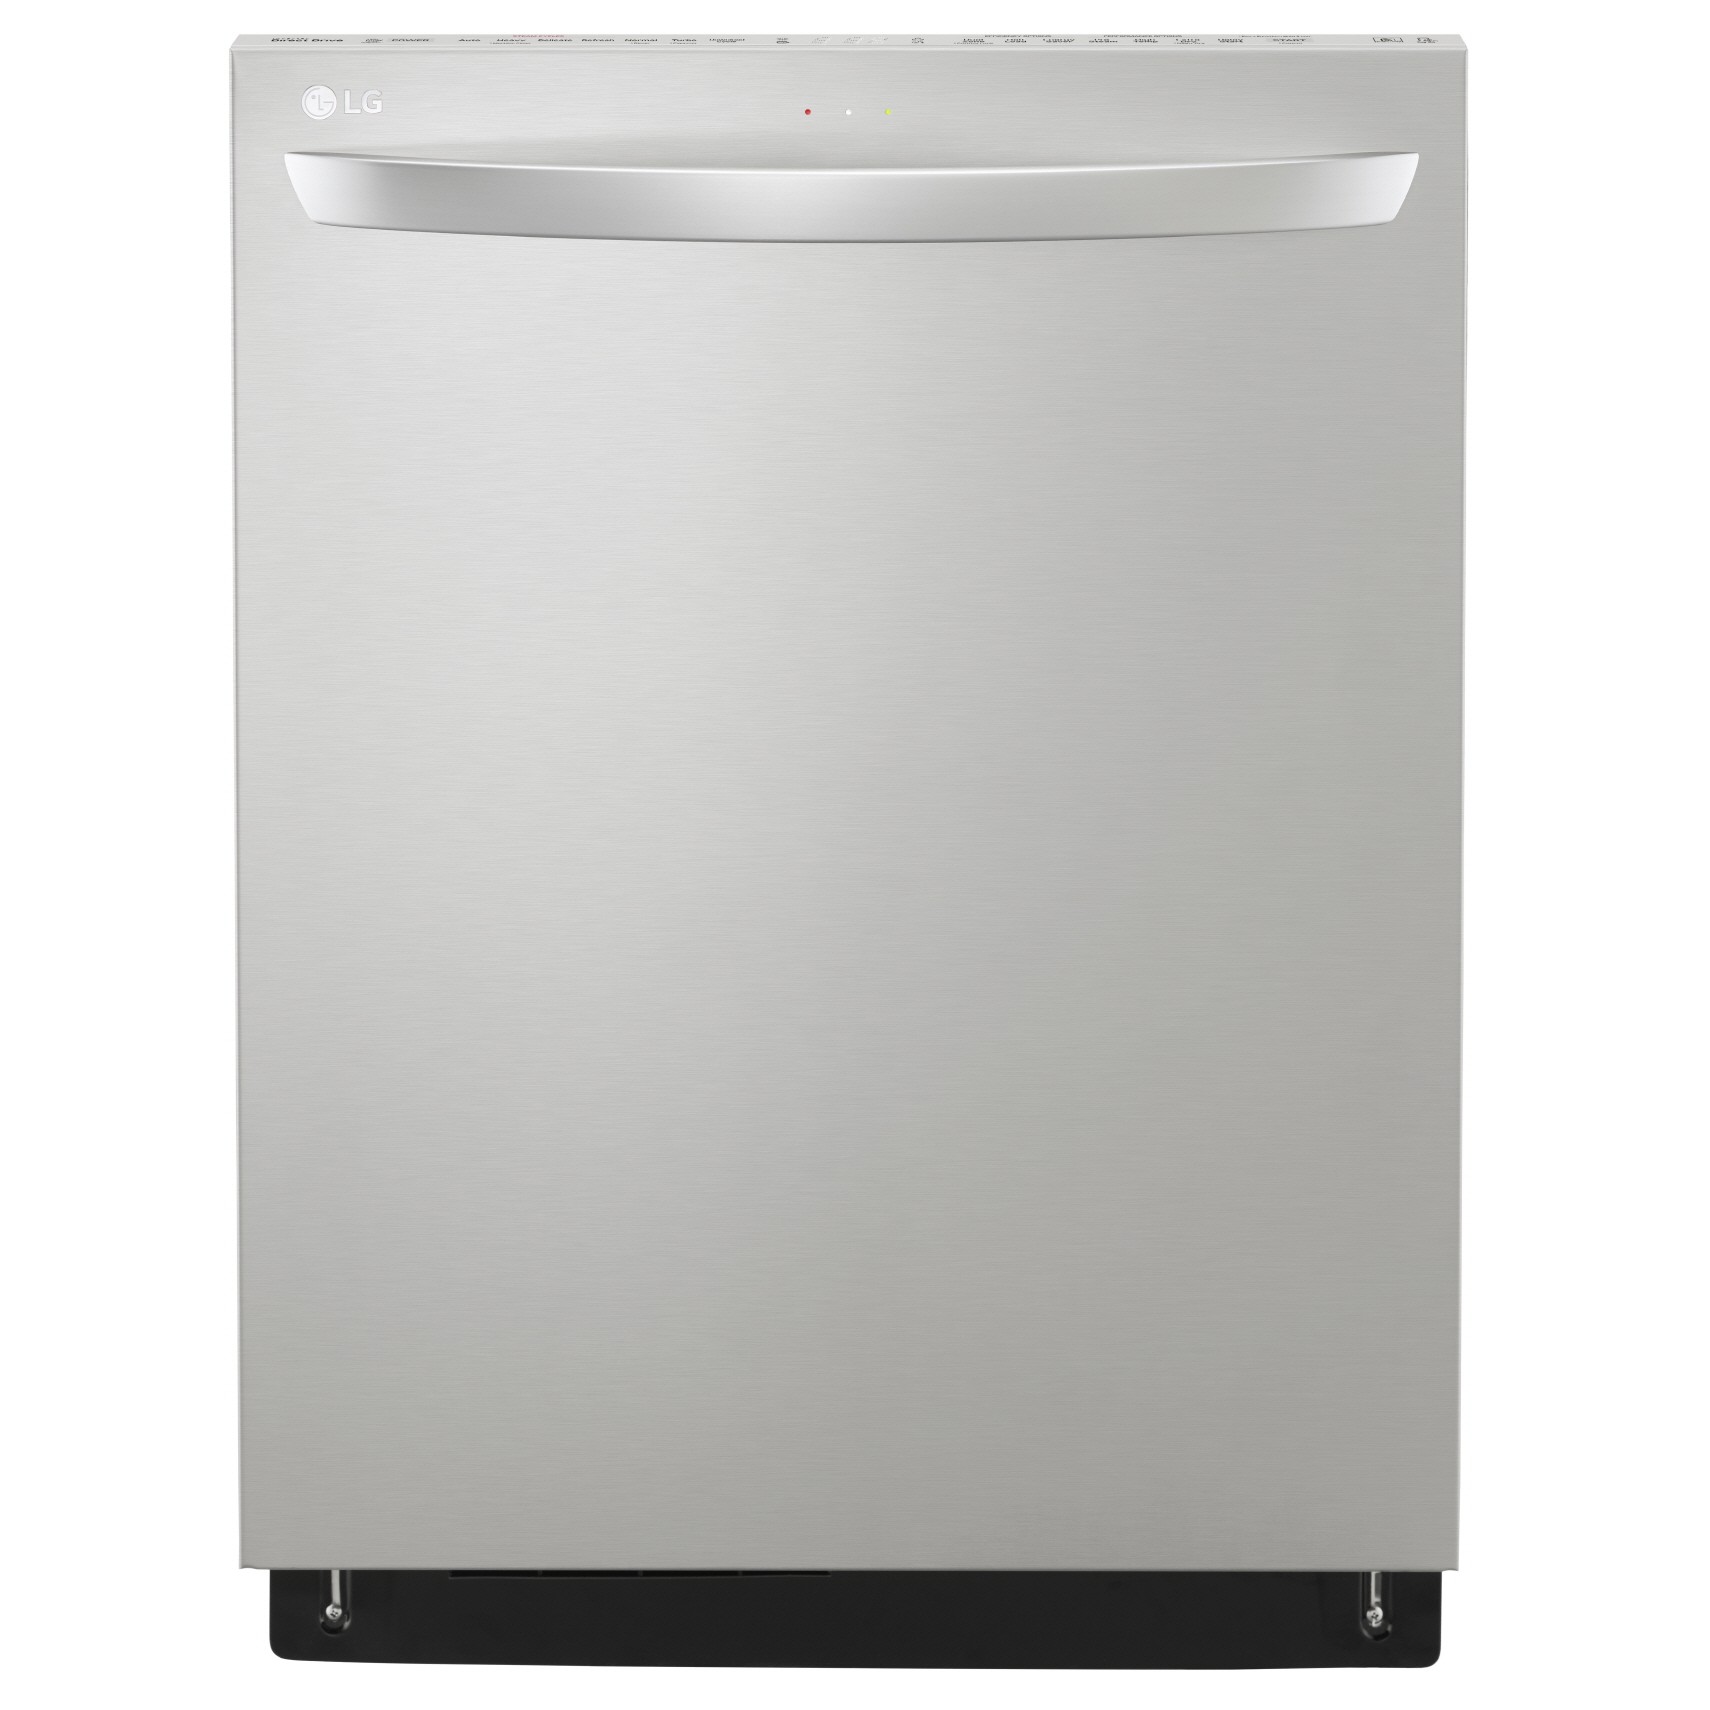 Front view of LG Dishwasher